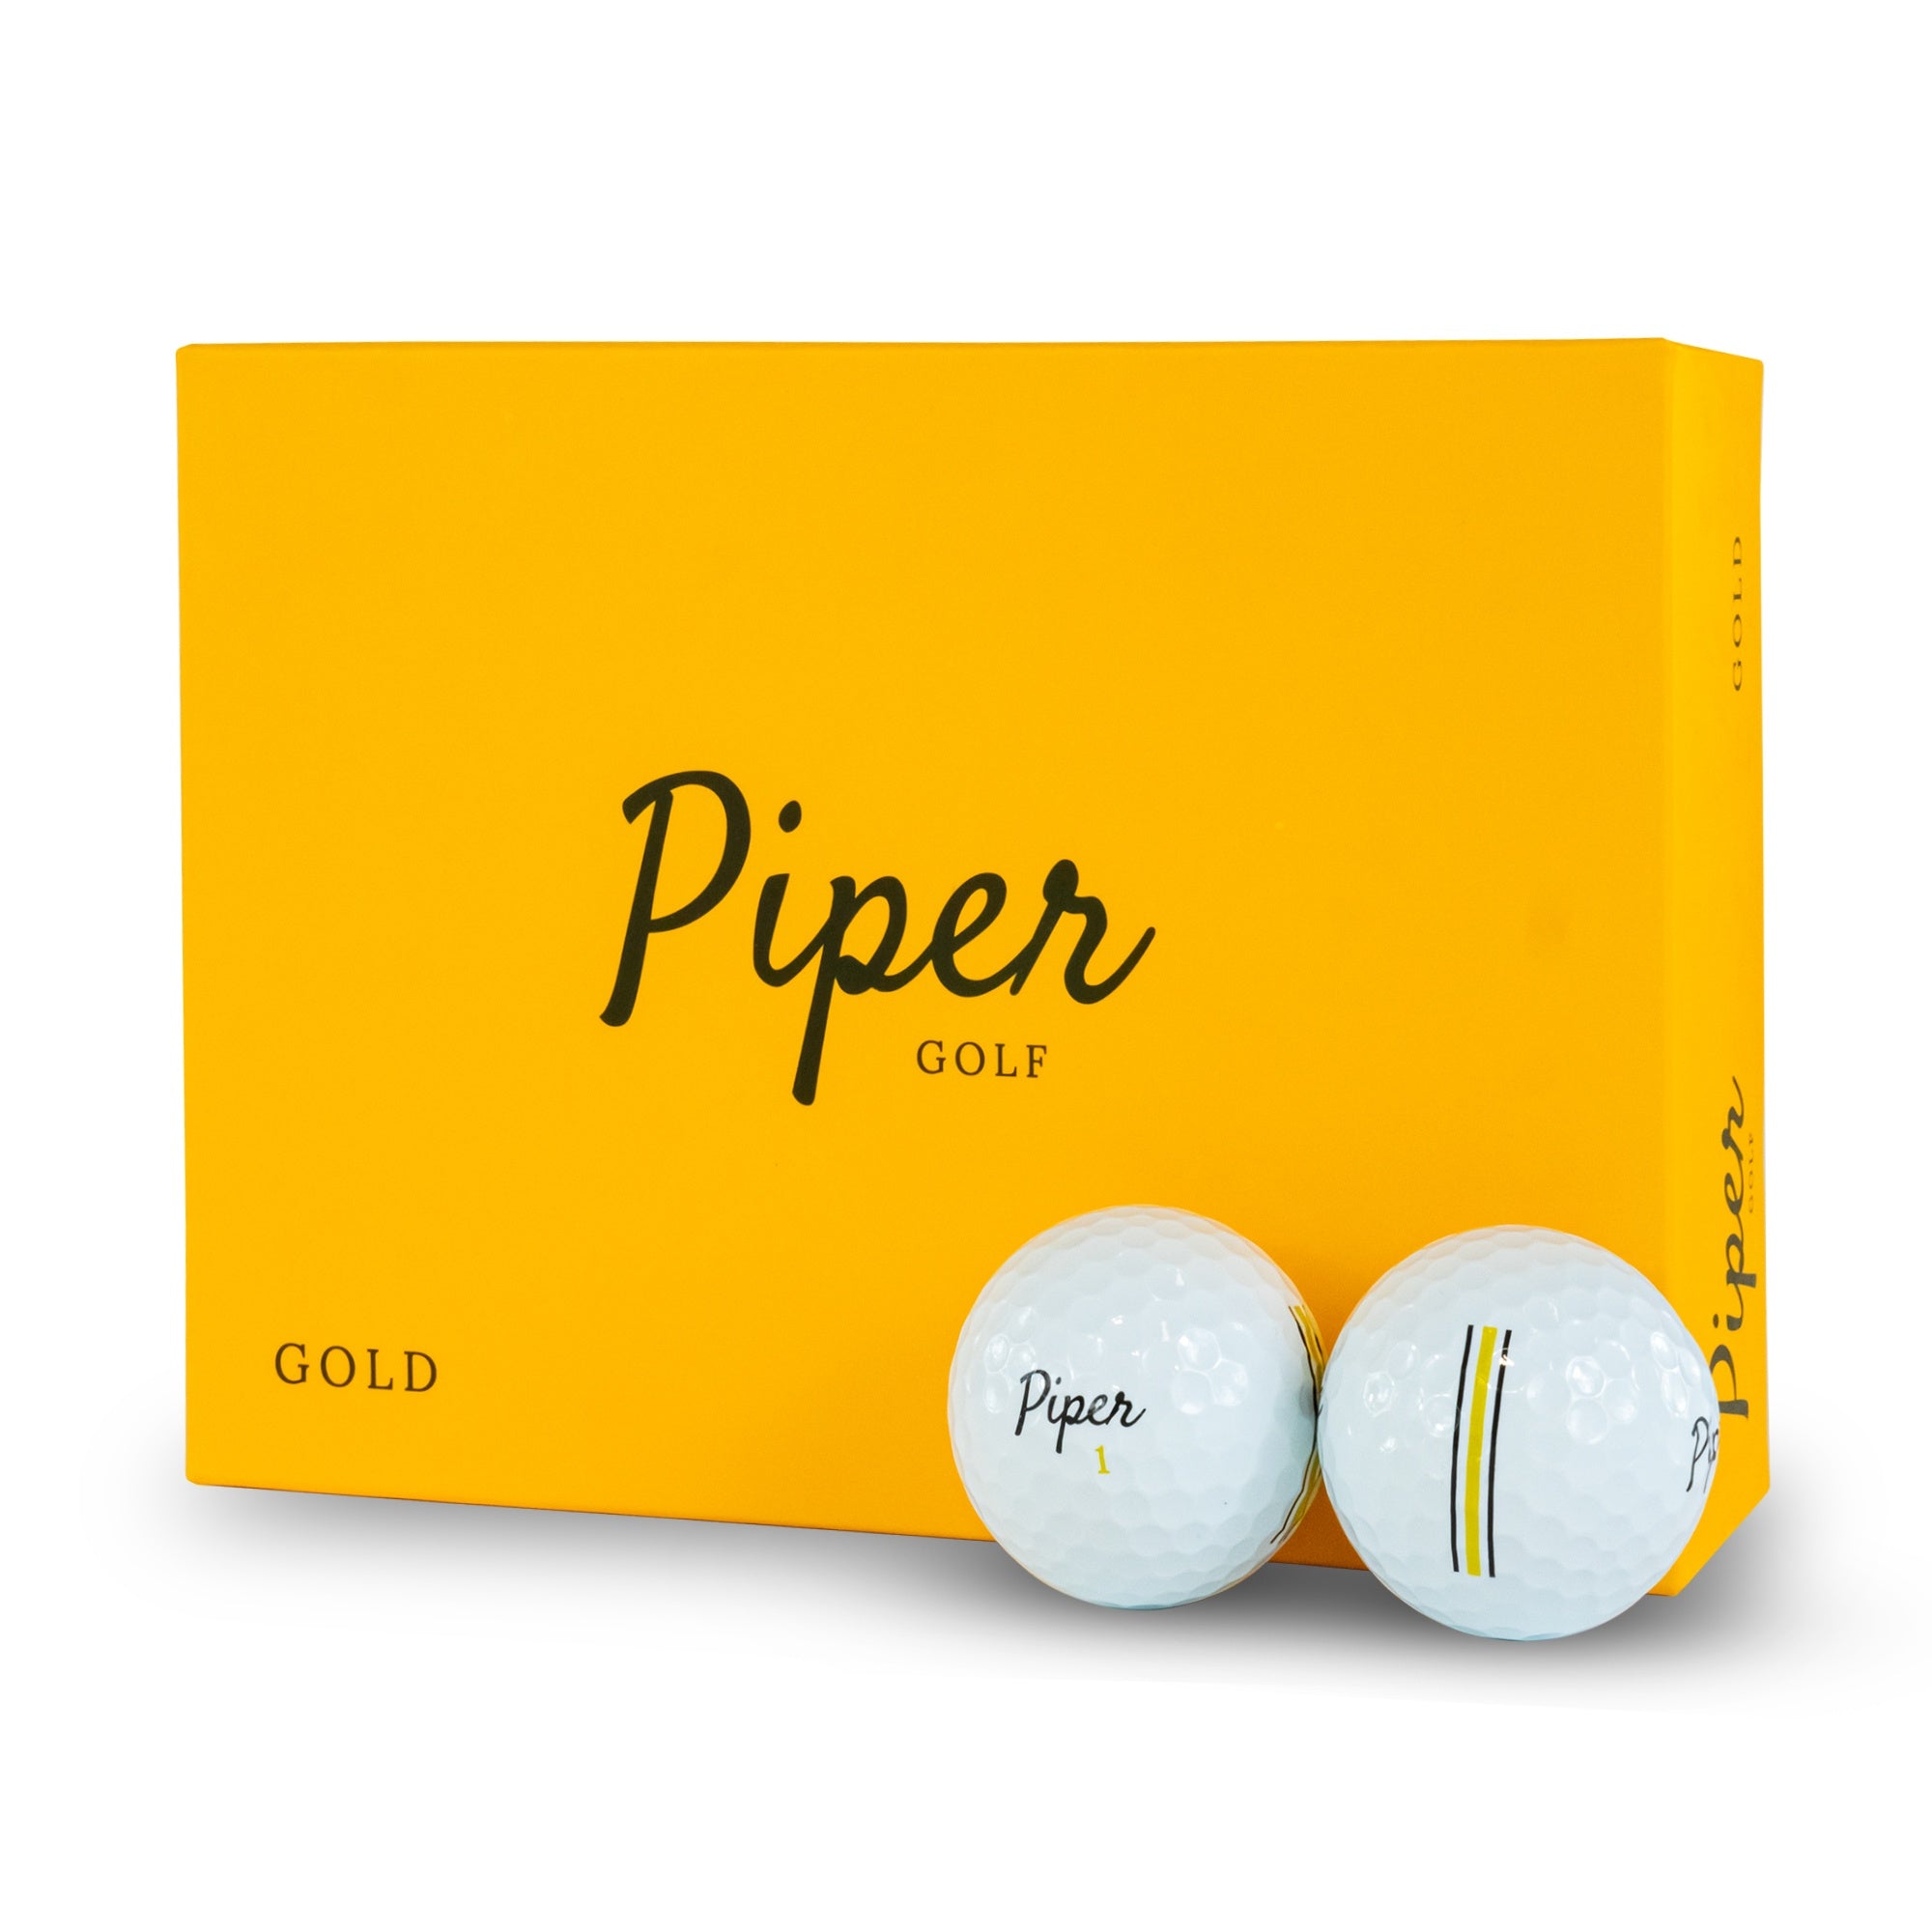 Piper Golf The Best Tour Quality Golf Balls at Amateur Prices